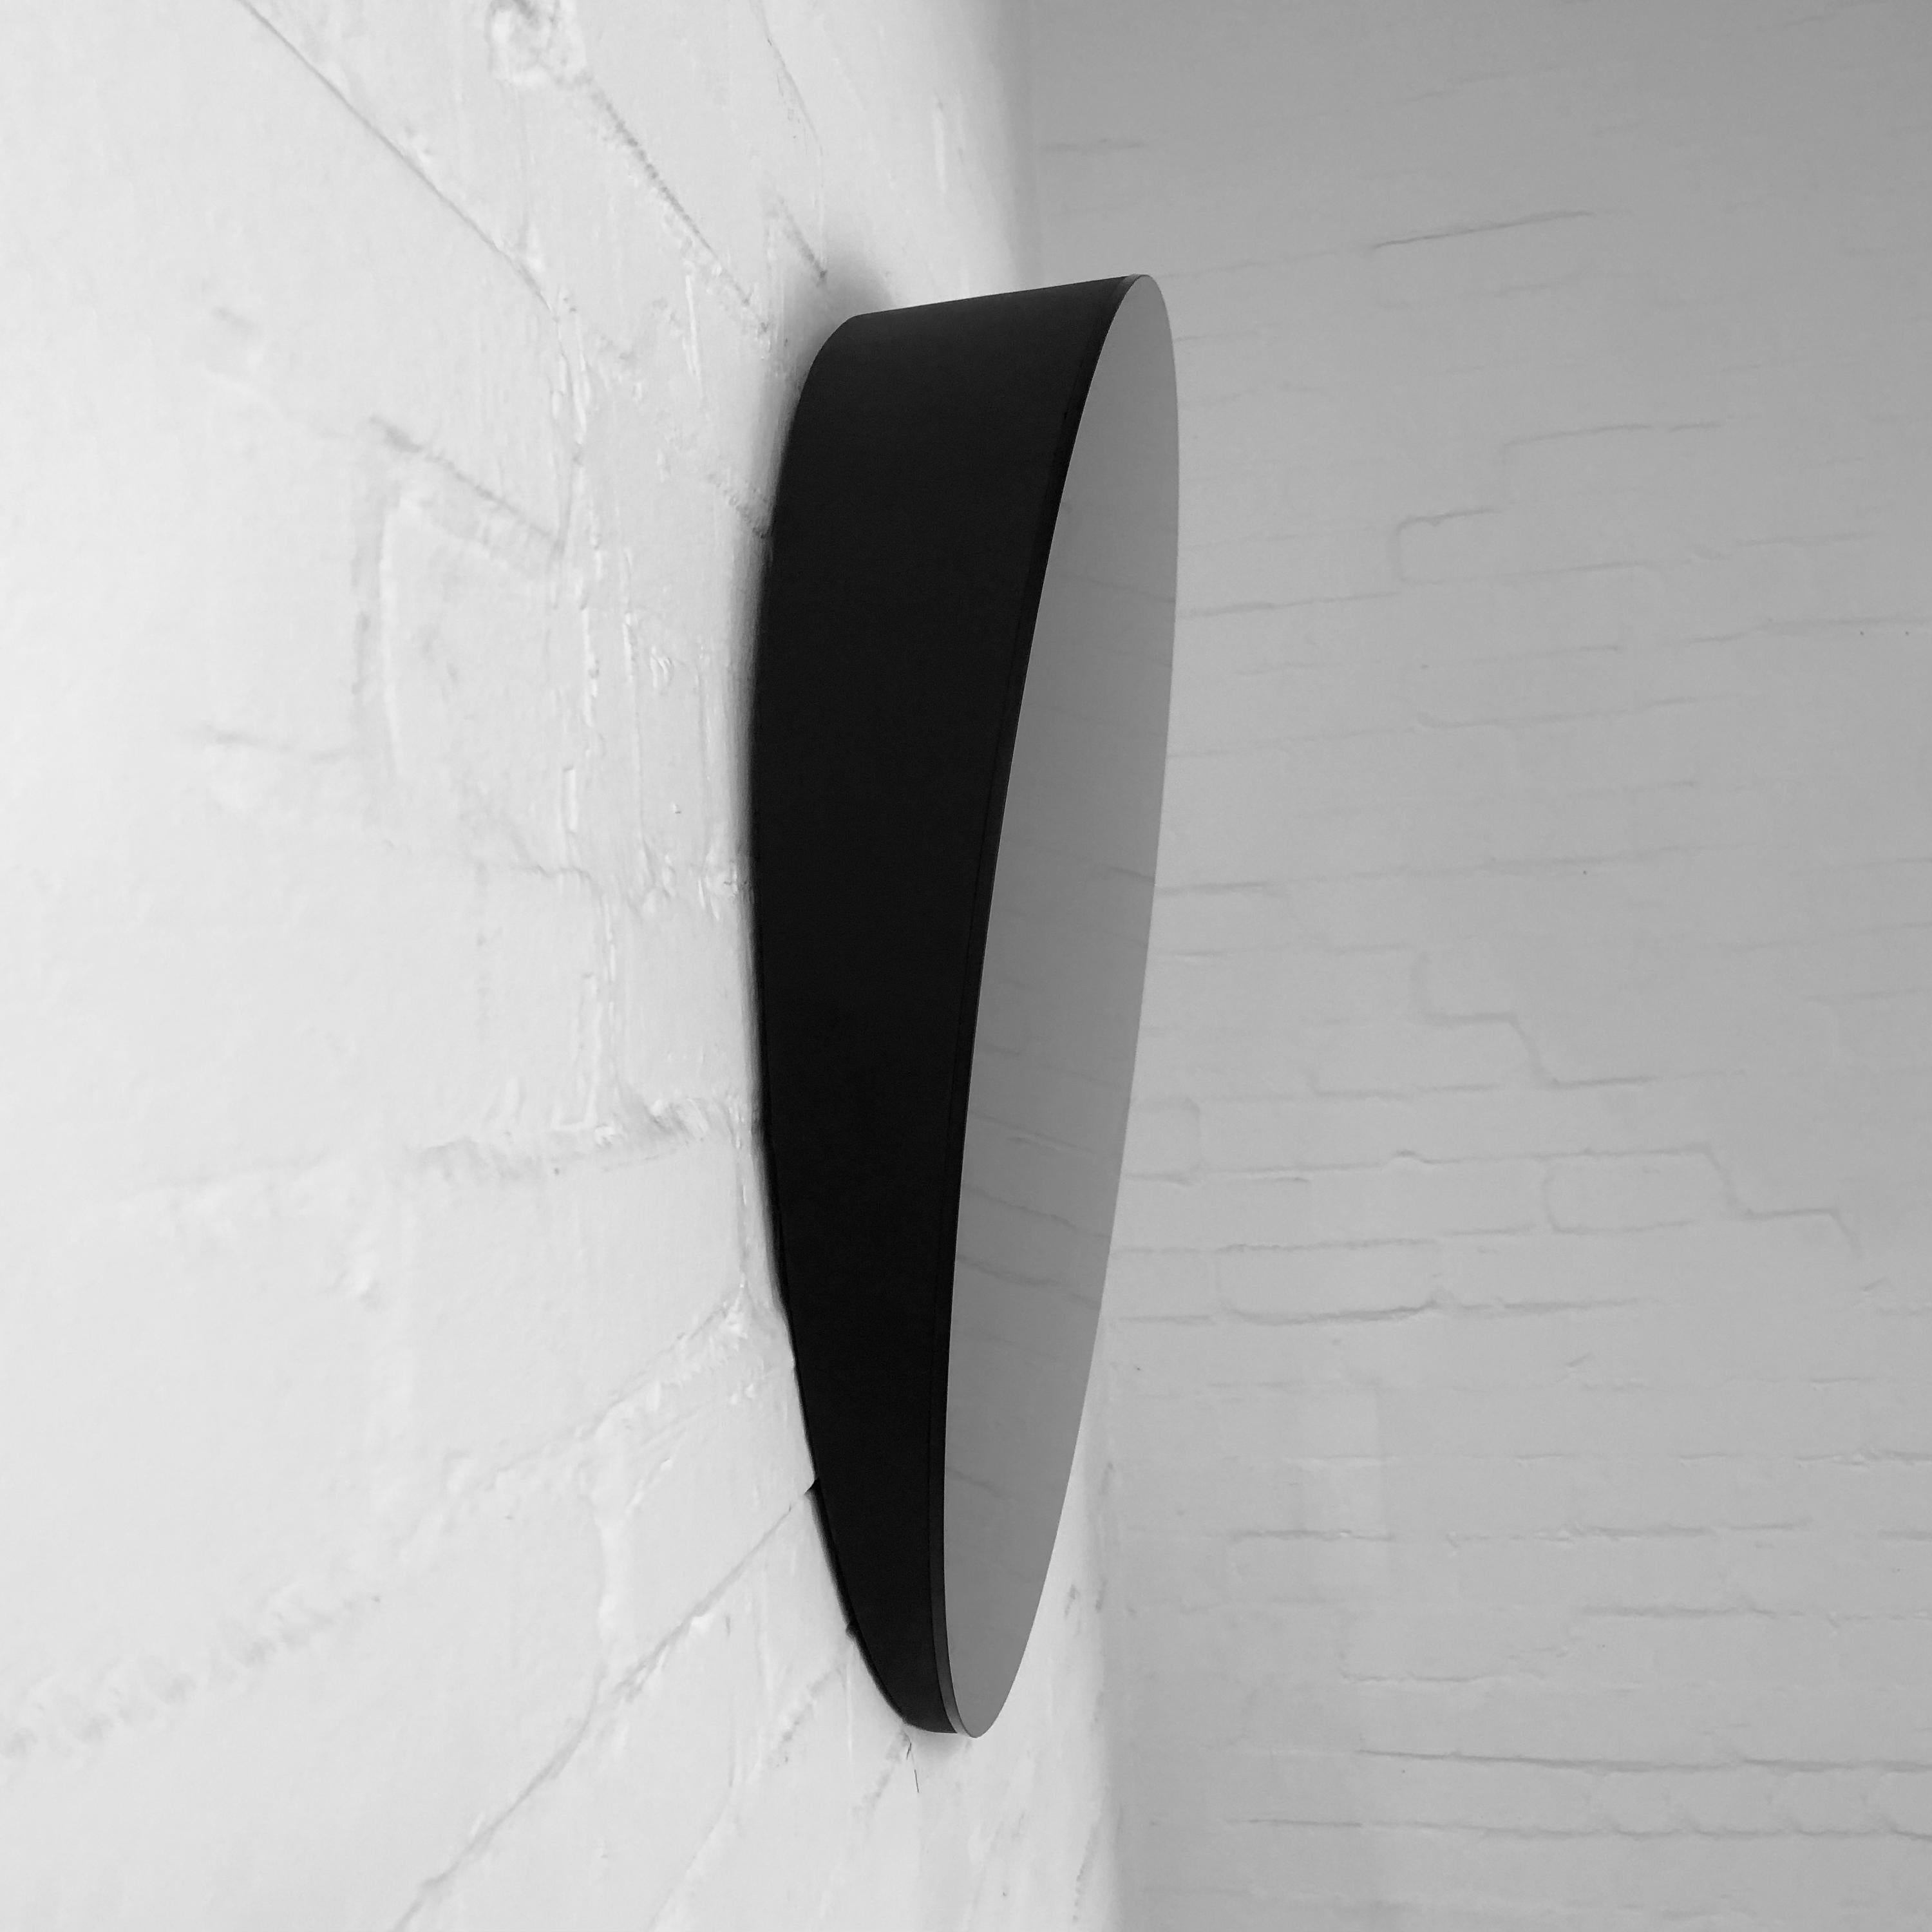 Orbis Round Black Tilted Minimalist Accessible Mirror, Medium In New Condition For Sale In London, GB